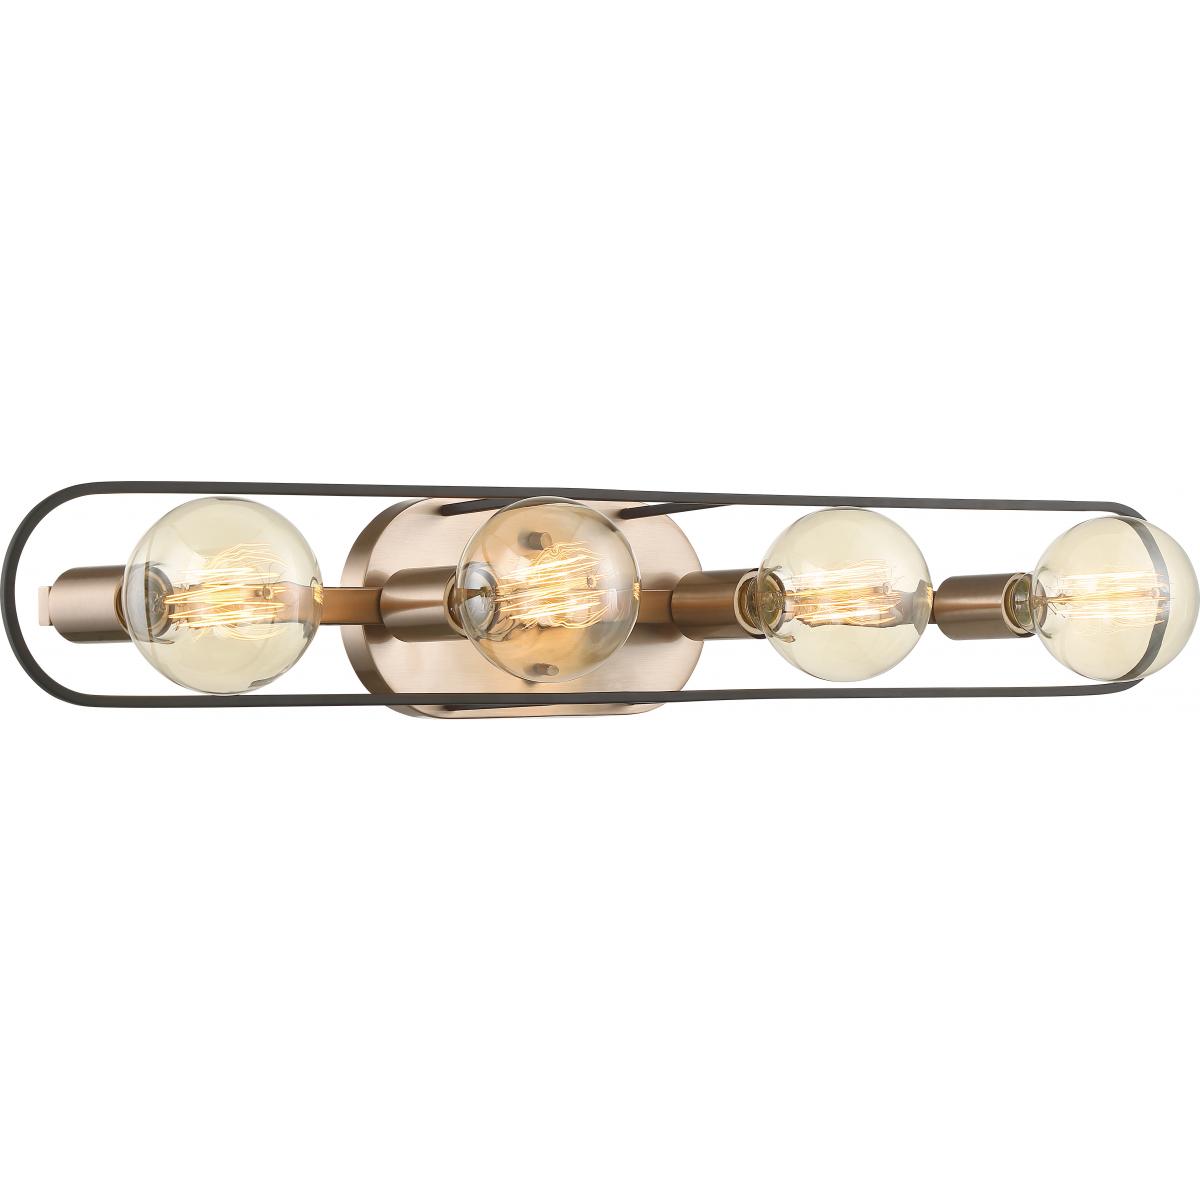 Chassis 32 in. 4 Lights Bath Bar Copper Finish